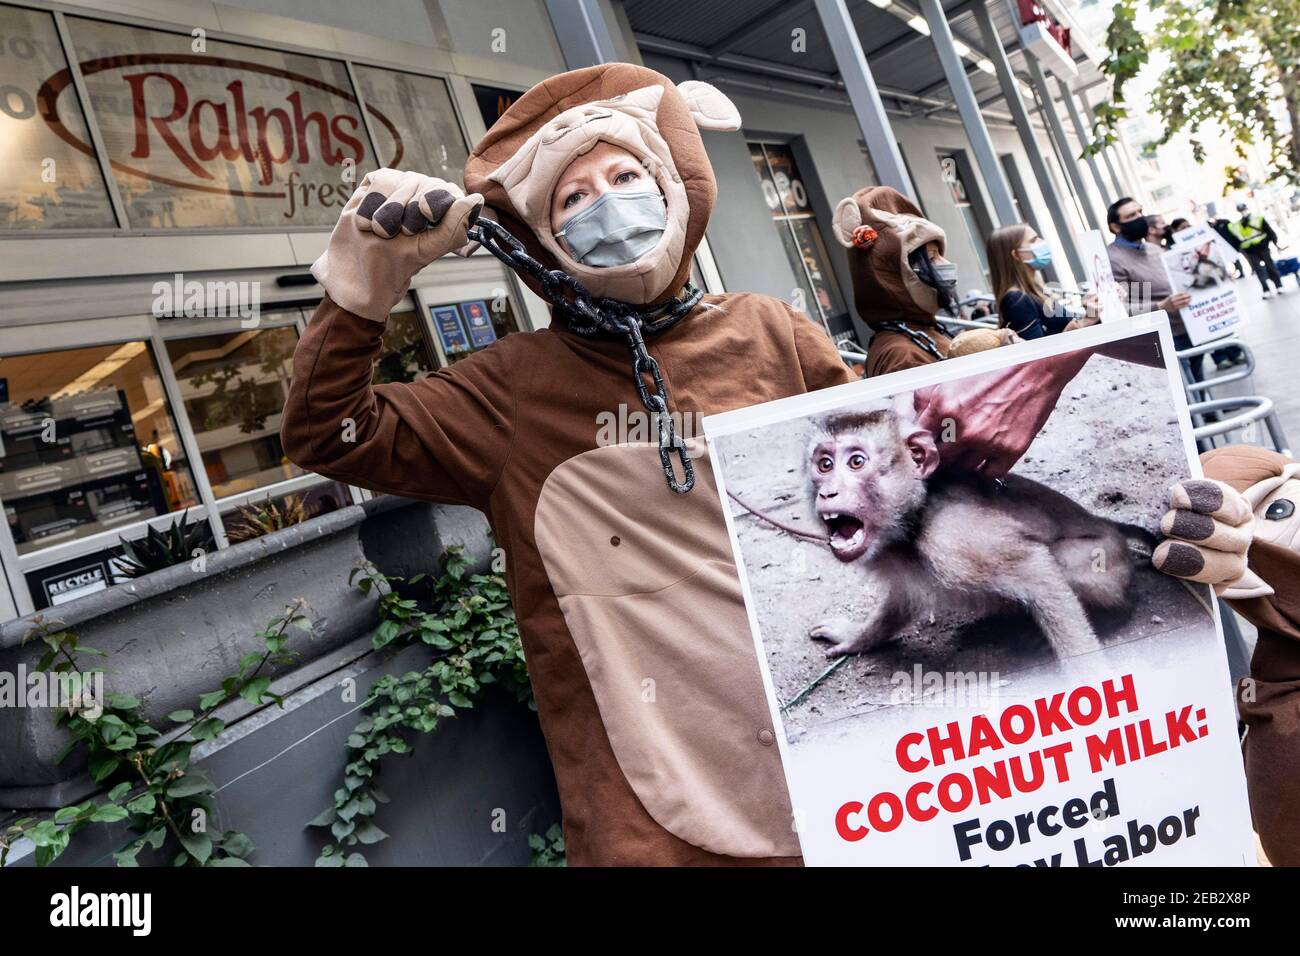 Los Angeles, California, USA. 16th Nov, 2020. PETA activists dressed in monkey costumes hold placards during a protest against Thailand's Chaokoh brand for allegedly forcing monkeys to climb up trees to collect coconuts and keeping them in cruel conditions. Major U.S. retailers such as Costco and Target stopped selling Chaokoh coconut milk over allegations of forced monkey labor. Credit: Ronen Tivony/SOPA Images/ZUMA Wire/Alamy Live News Stock Photo